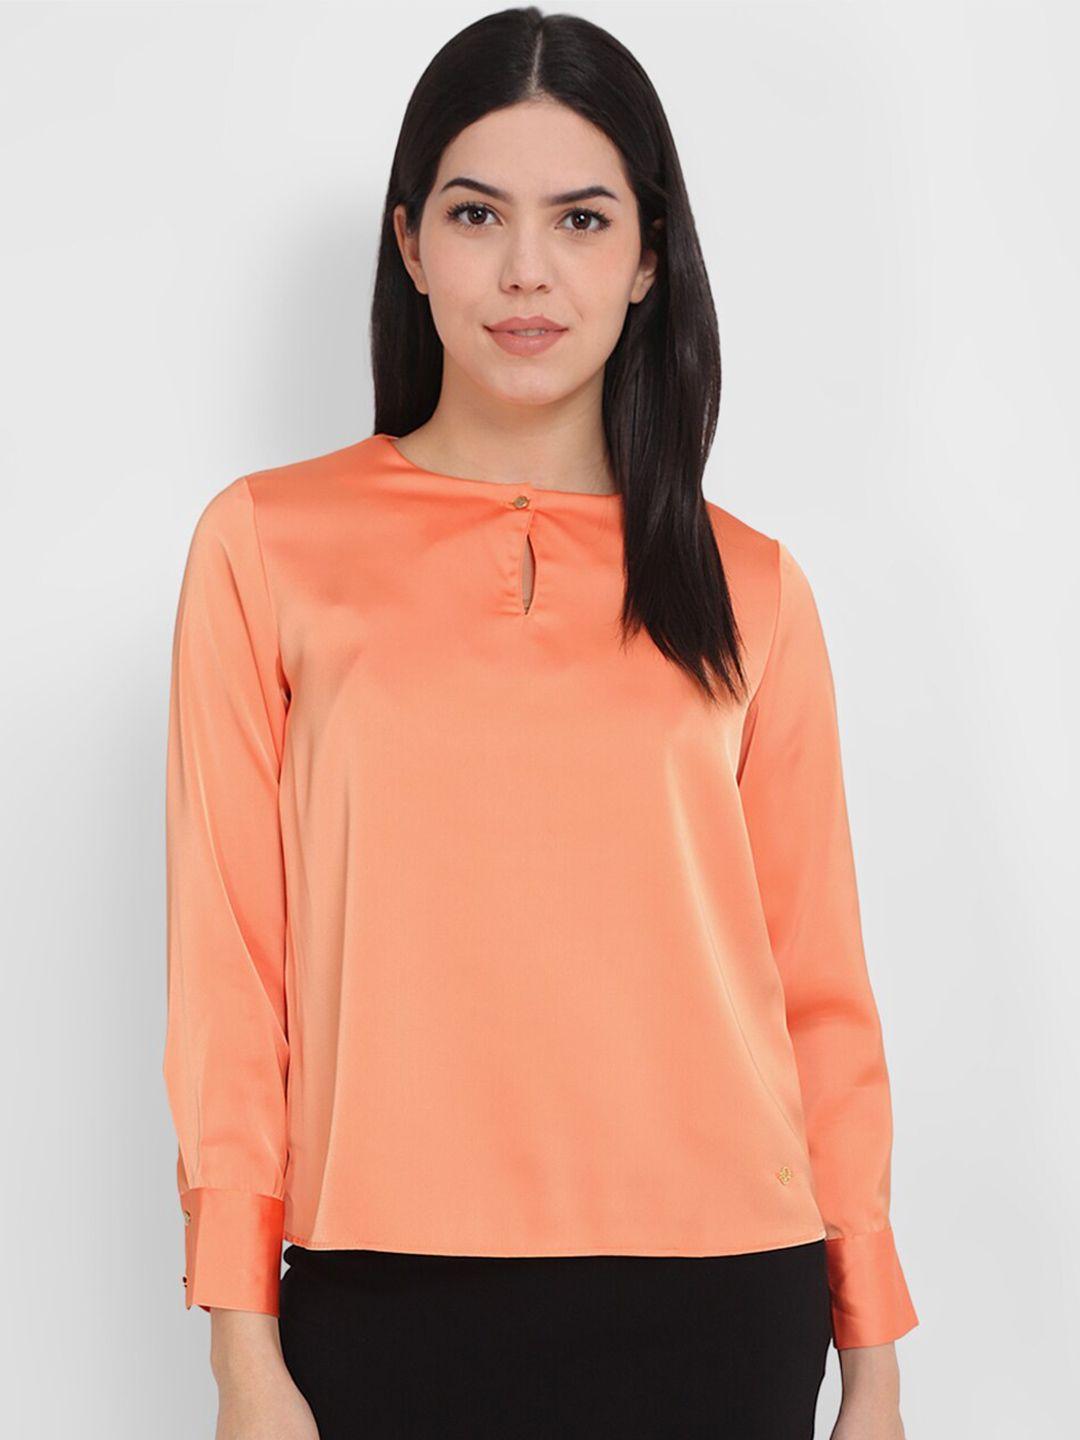 allen solly cuffed sleeves top